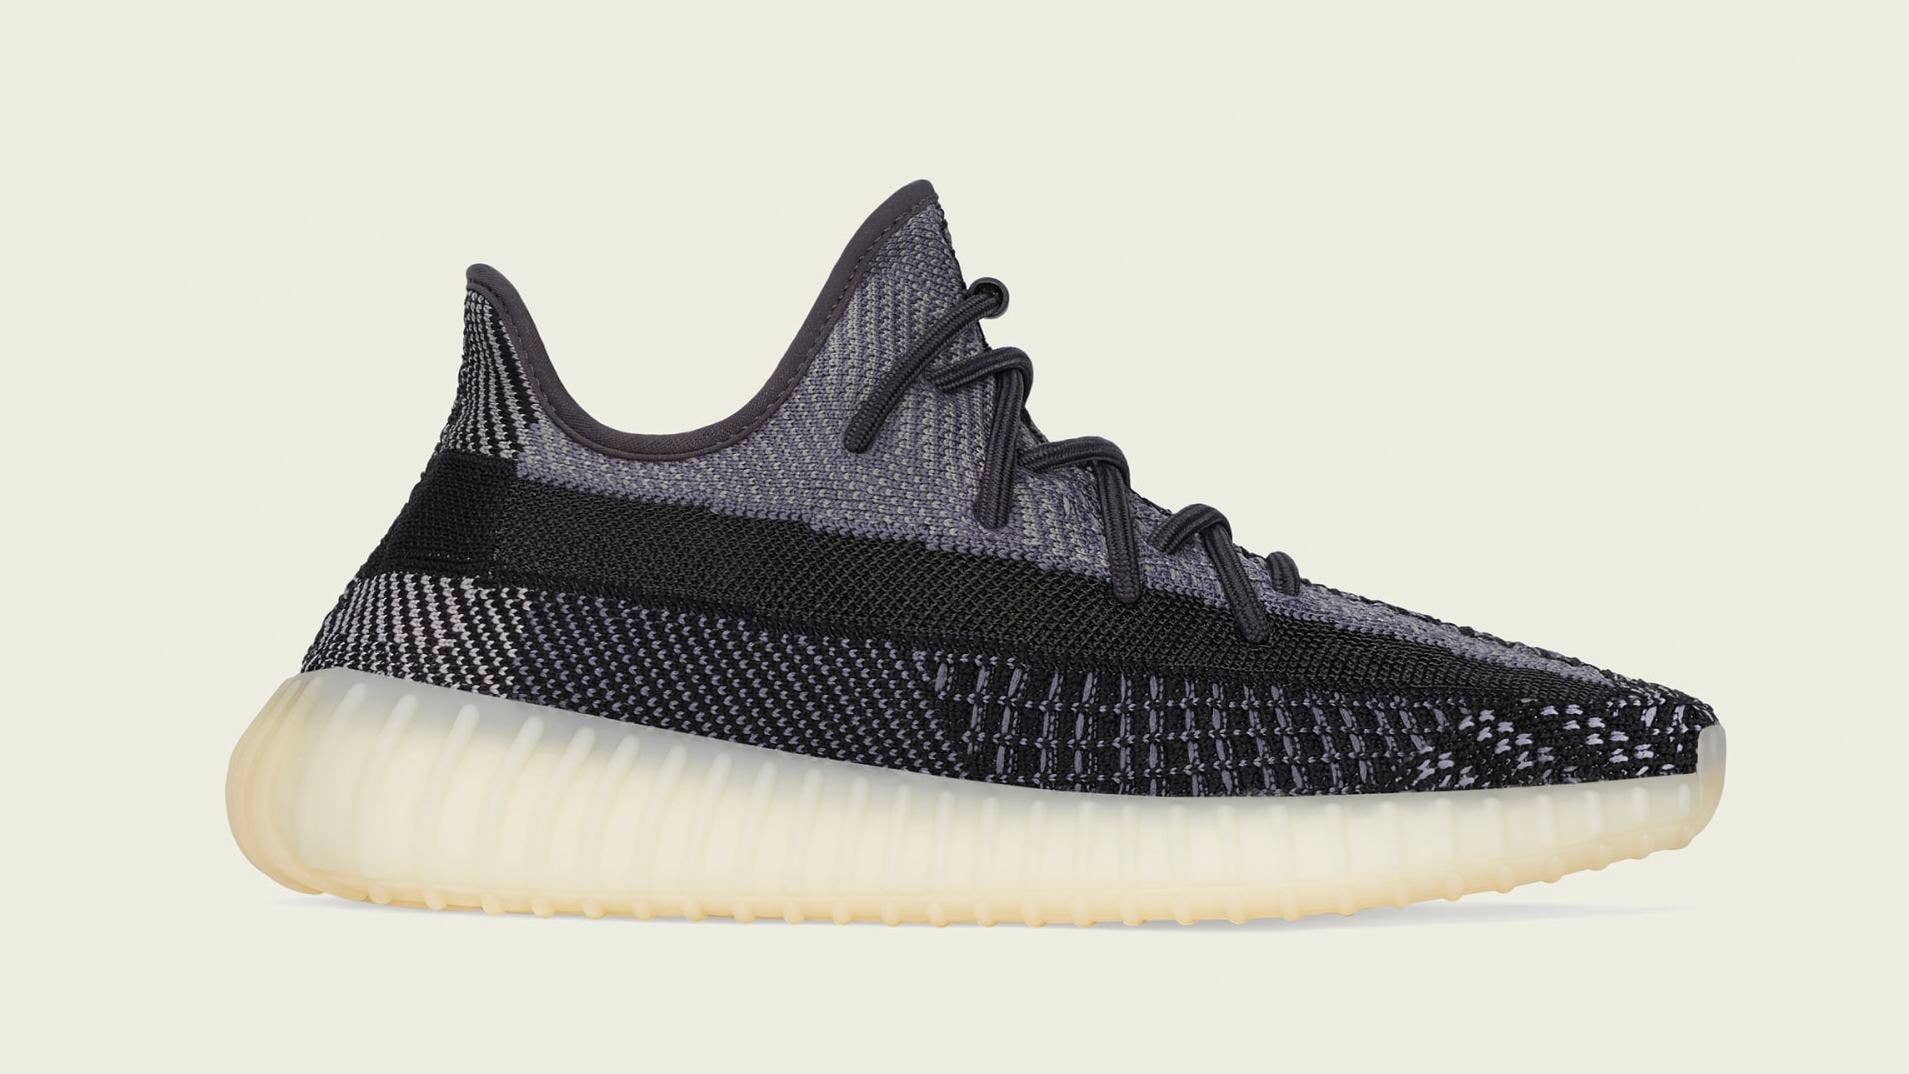 Adidas Yeezy boost 350 V2 'Carbon' FZ5000 Lateral